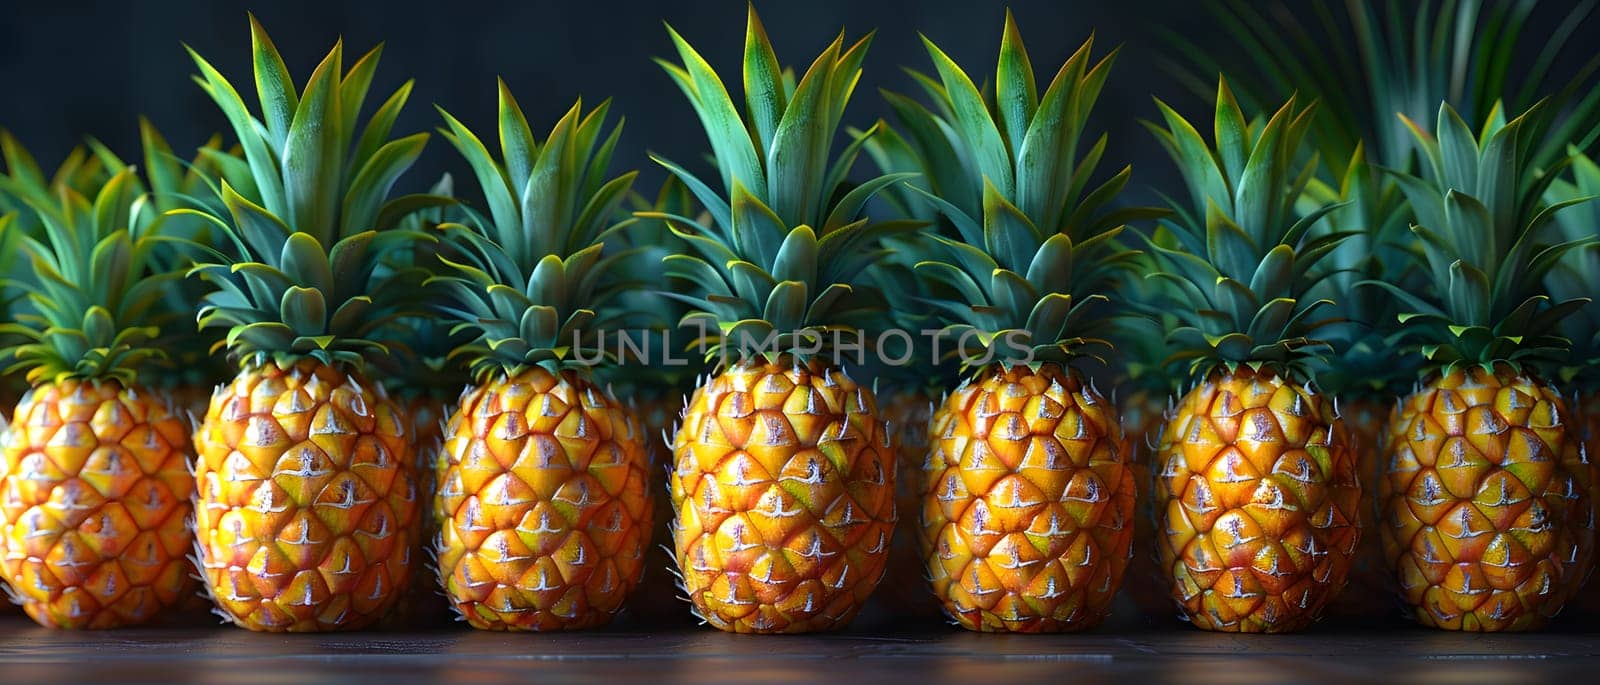 Pineapples are arranged in a row on a wooden table by Nadtochiy